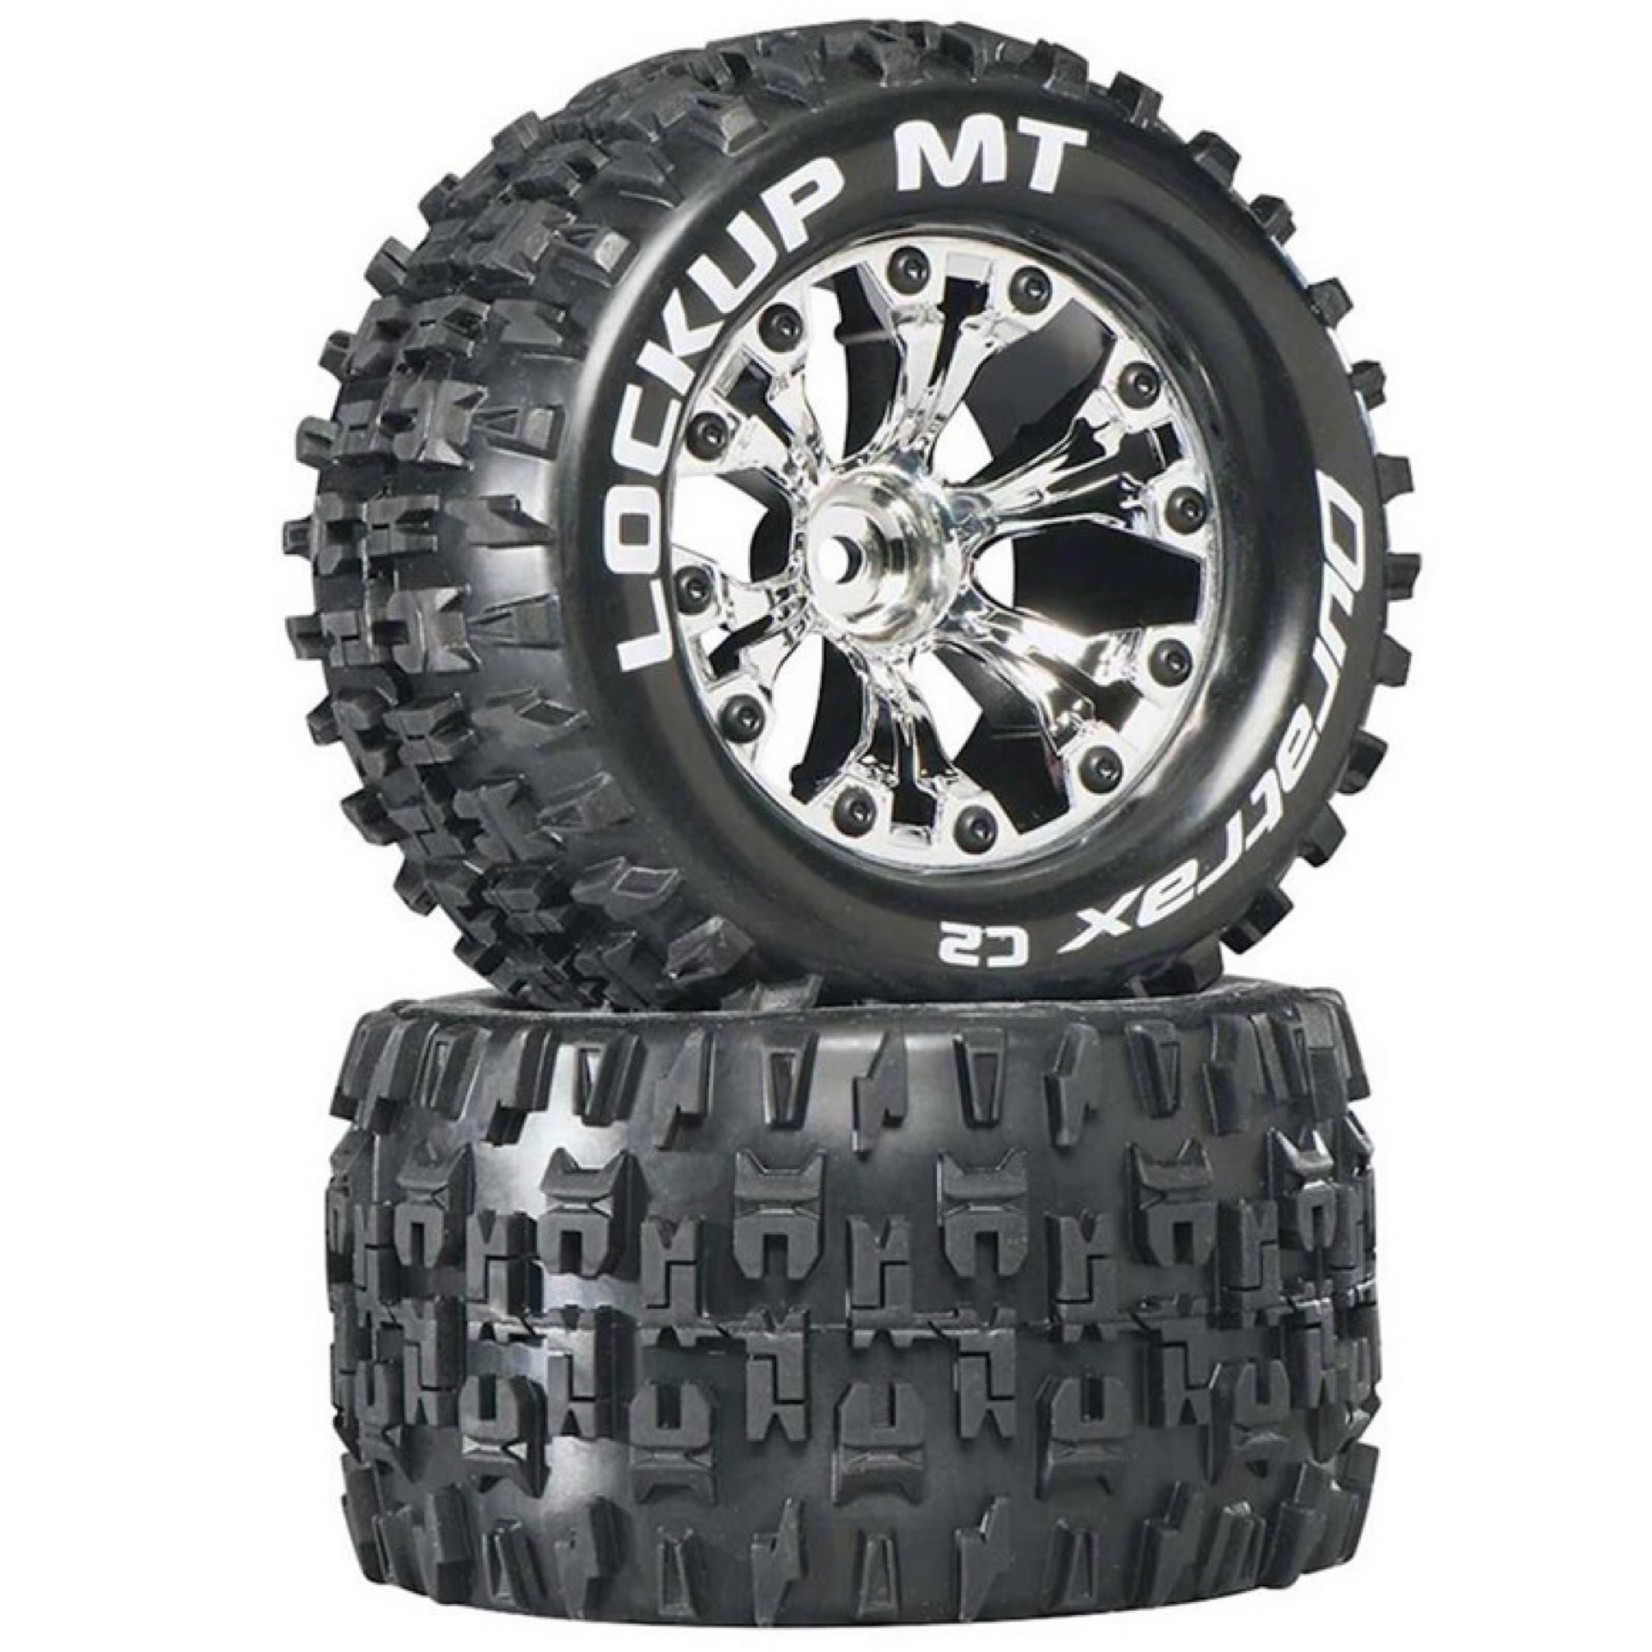 Duratrax DuraTrax Lockup MT 2.8" 2WD Pre-Mounted 1/2" Offset Tires (Chrome) (2) #DTXC3511